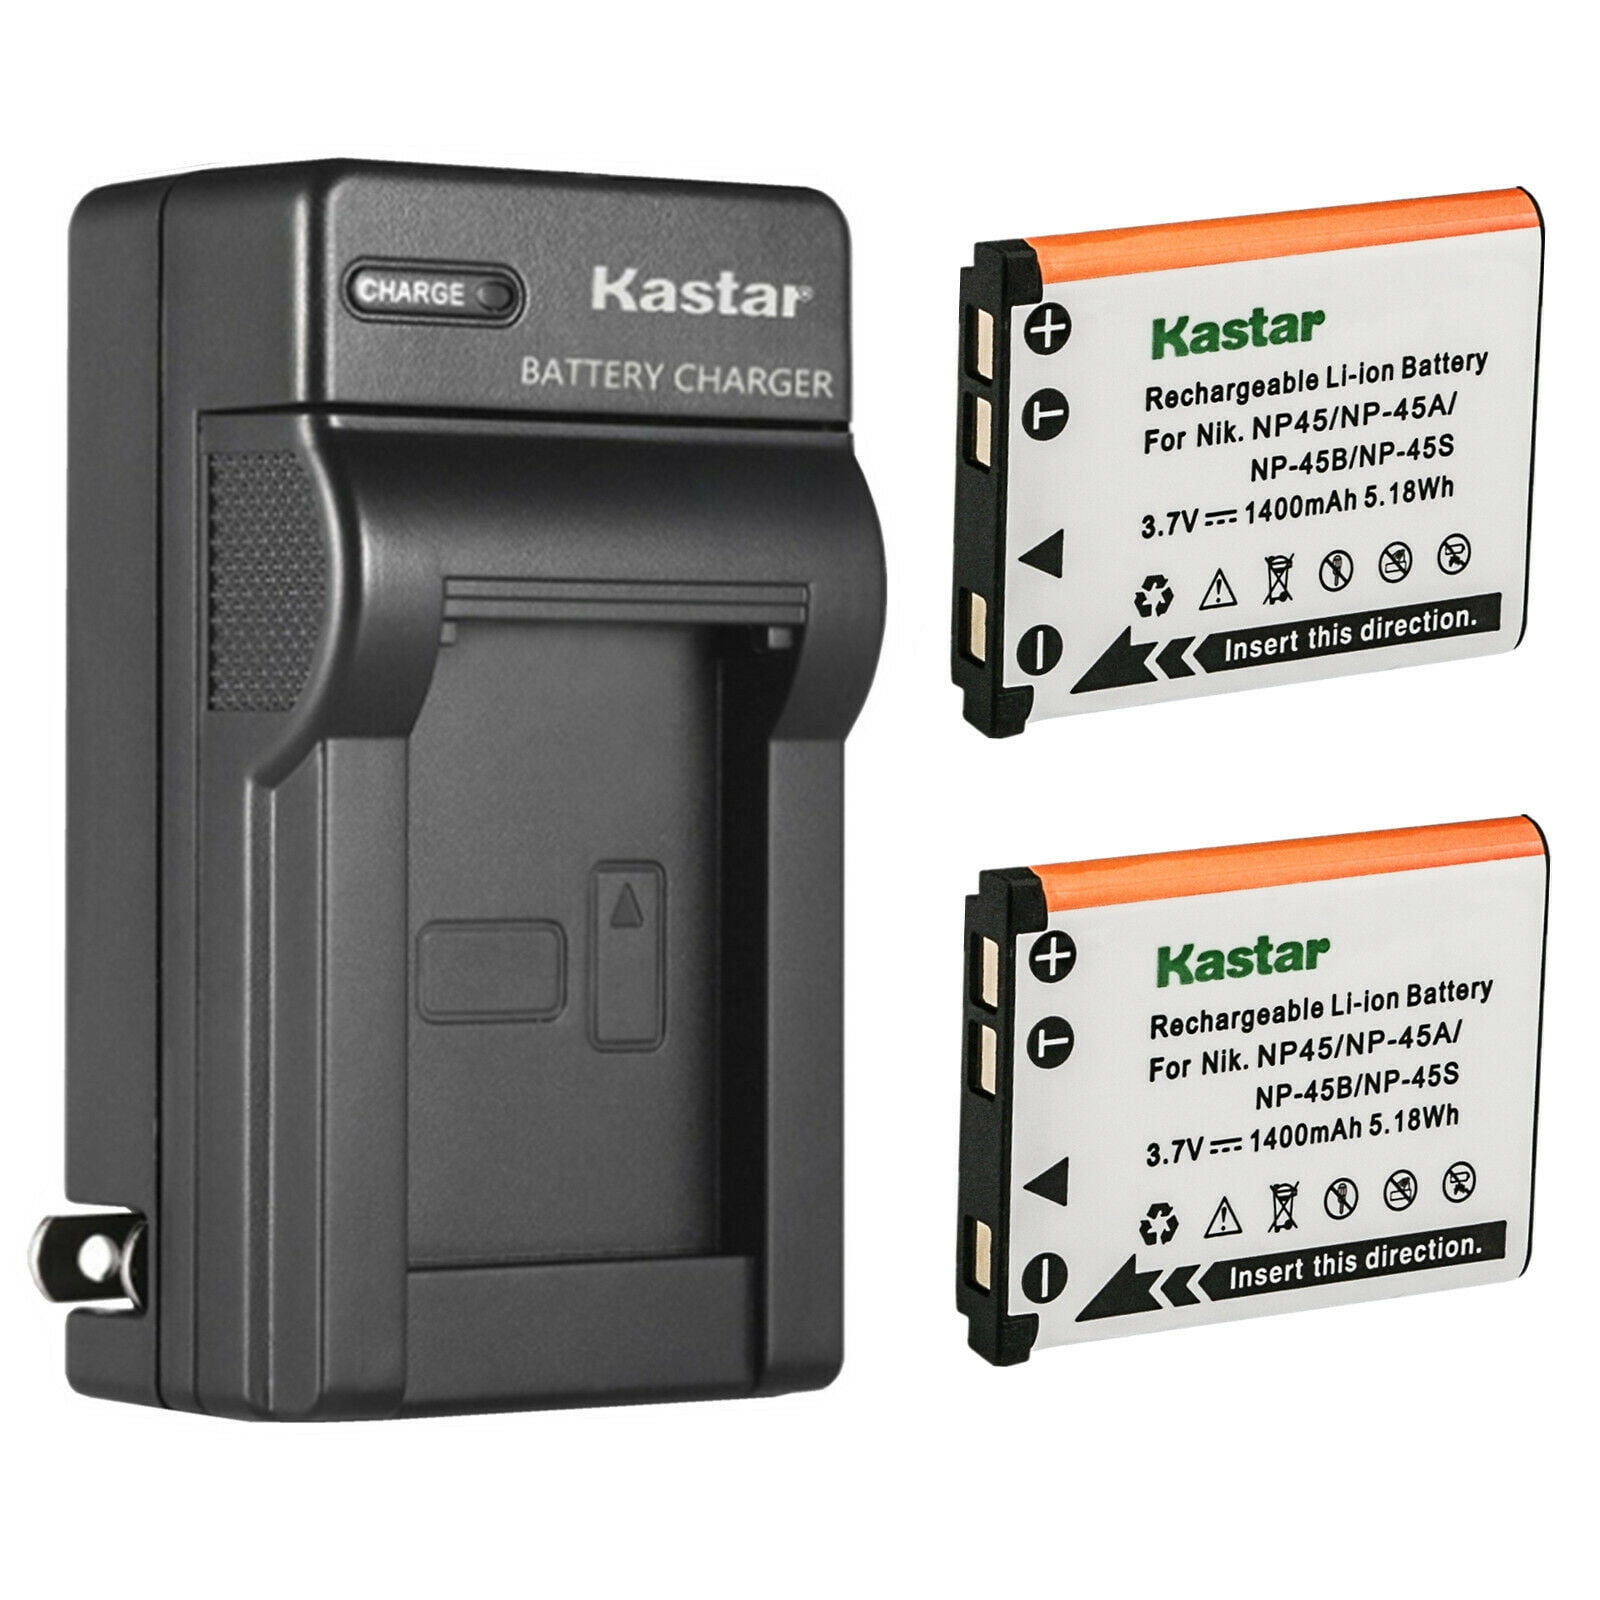 Kastar 2-Pack Battery and AC Wall Replacement for Fujifilm FinePix FinePix JV105 JV150 FinePix JV155 FinePix FinePix JV200 FinePix JV205 FinePix JV250 FinePix JV255 Camera - Walmart.com